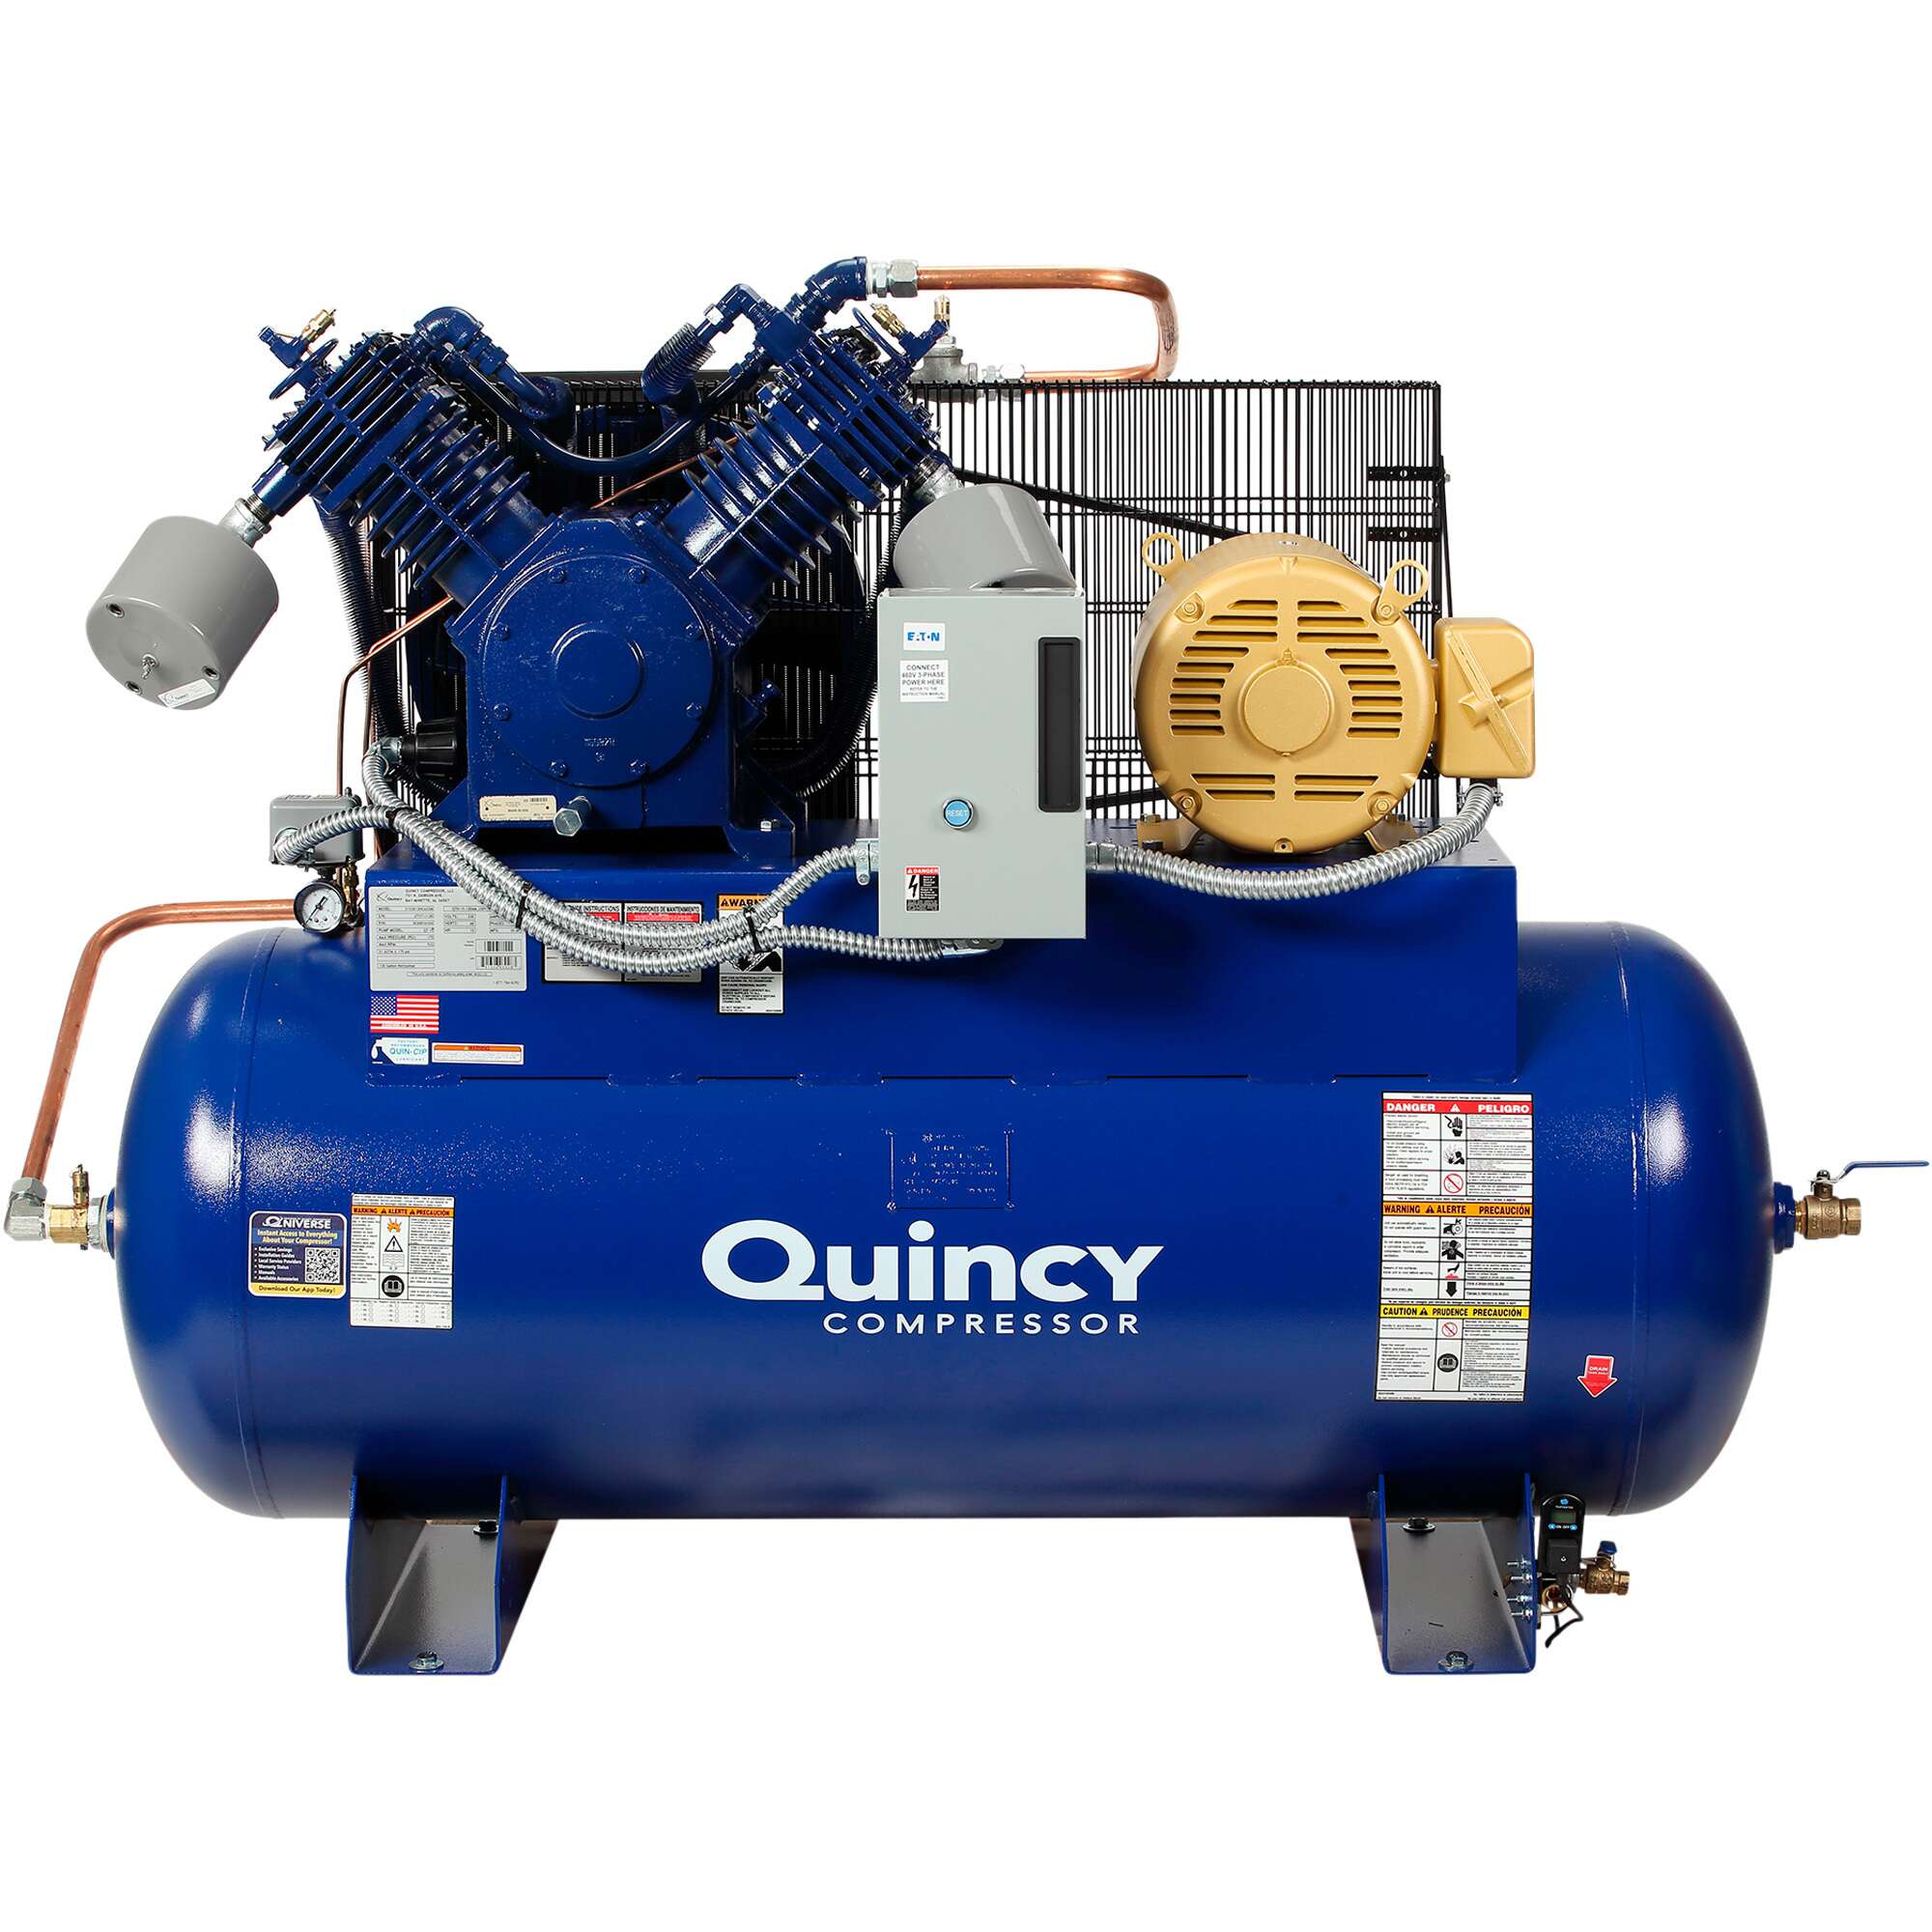 Quincy QT15 Splash Lubricated Air Compressor with MAX Package 15 HP 230 Volt 3 Phase 120 Gallon Horizontal